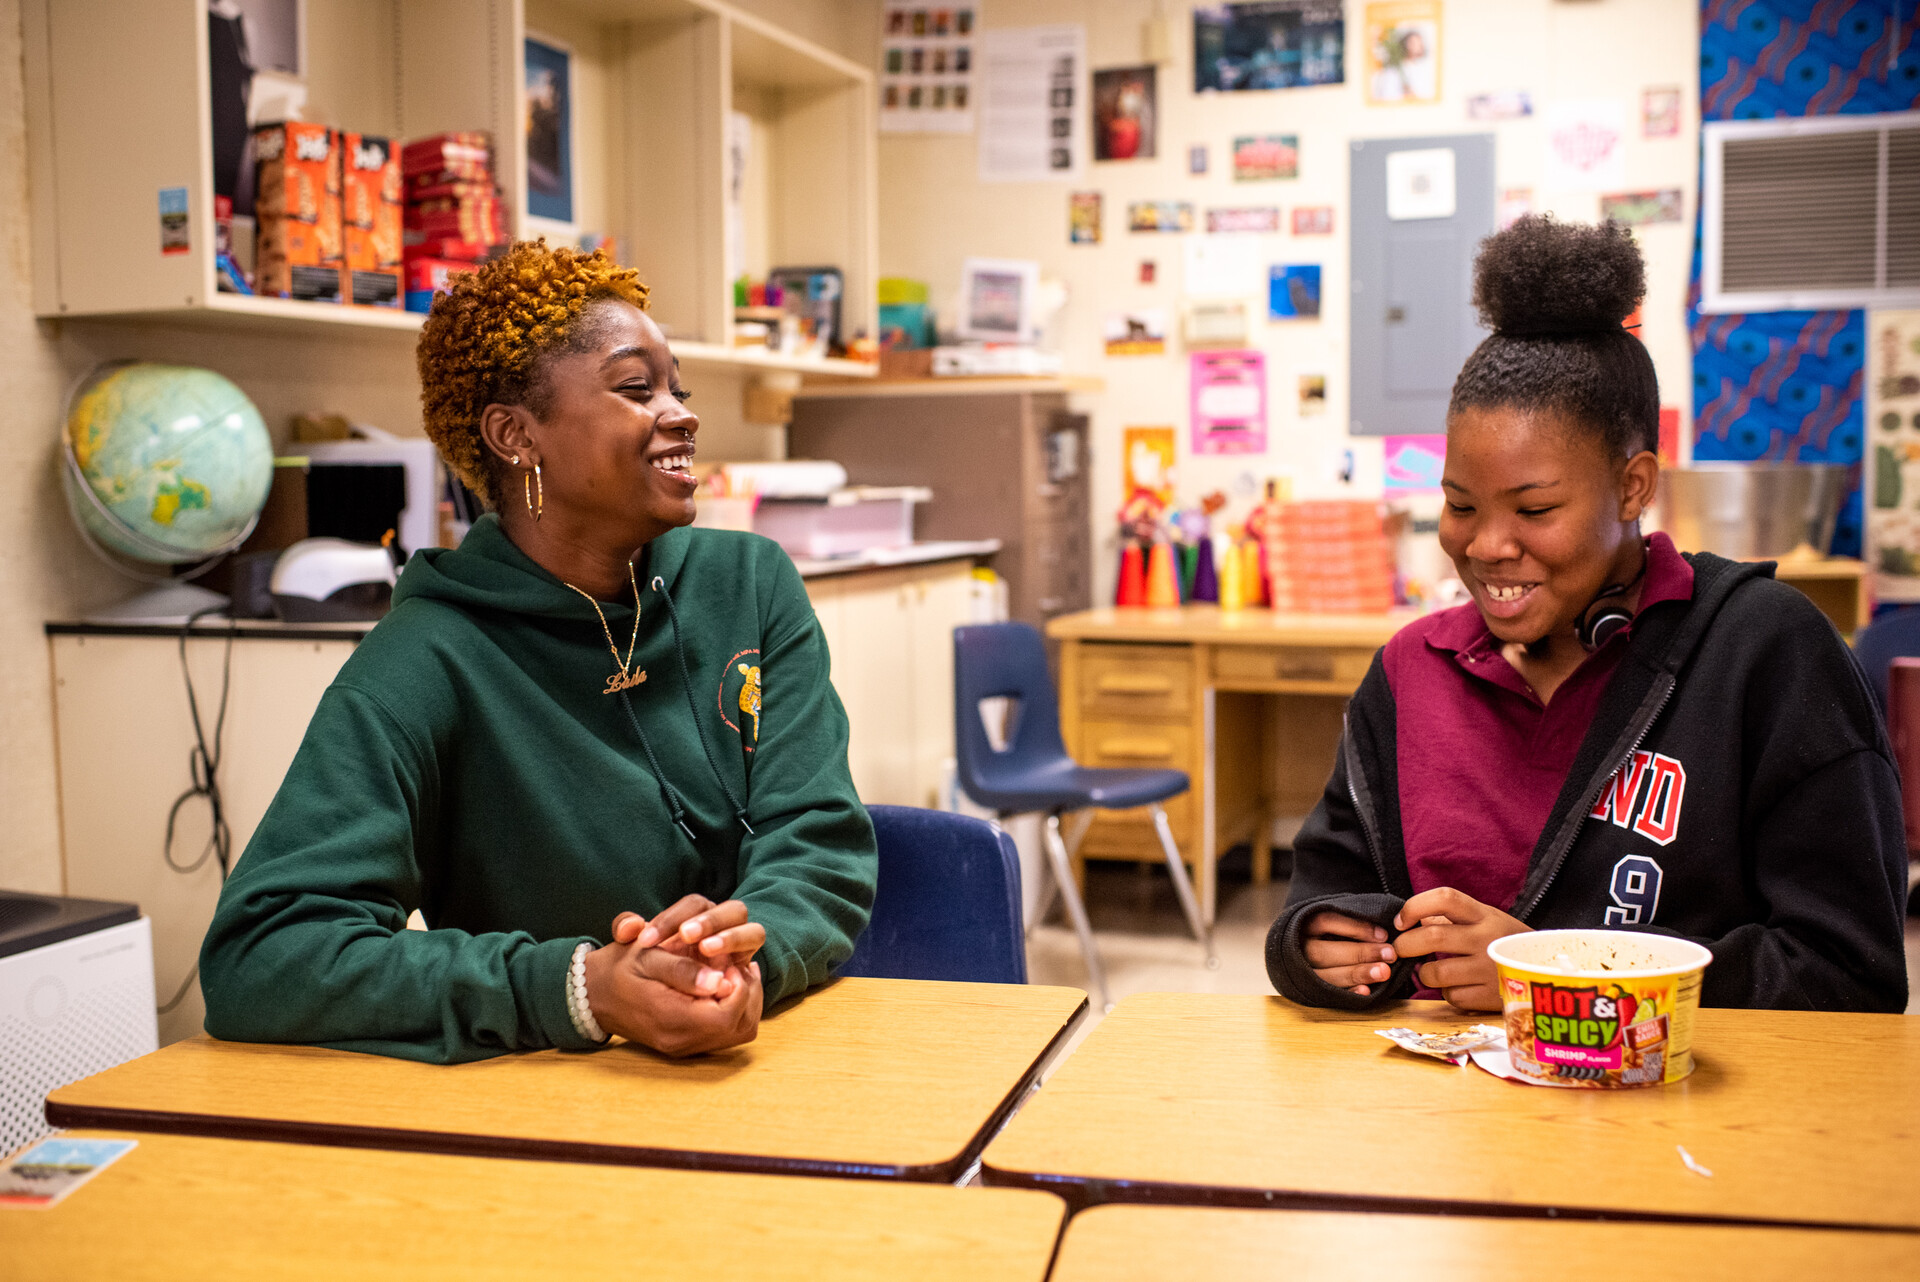 Two black female high school students sit in class and laugh together.